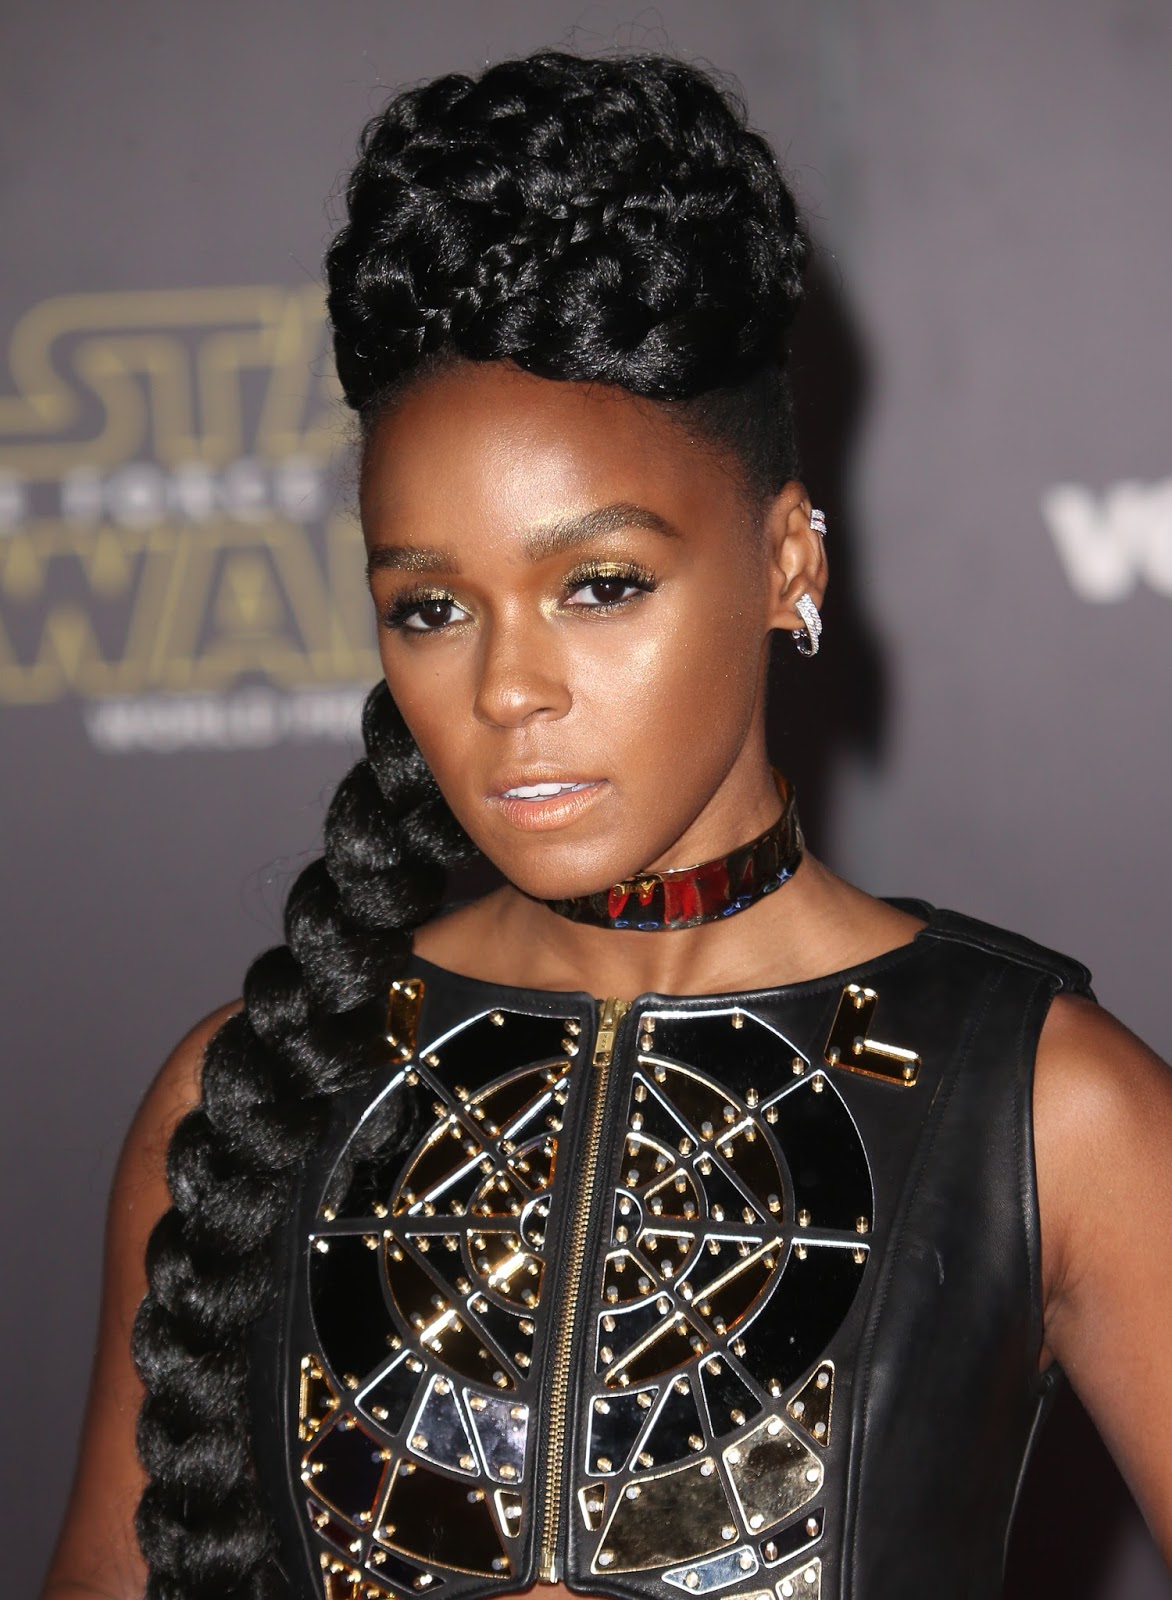 Actress, Singer, @ Janelle Monae - Star Wars: The Force Awakens Premiere in Hollywood ...